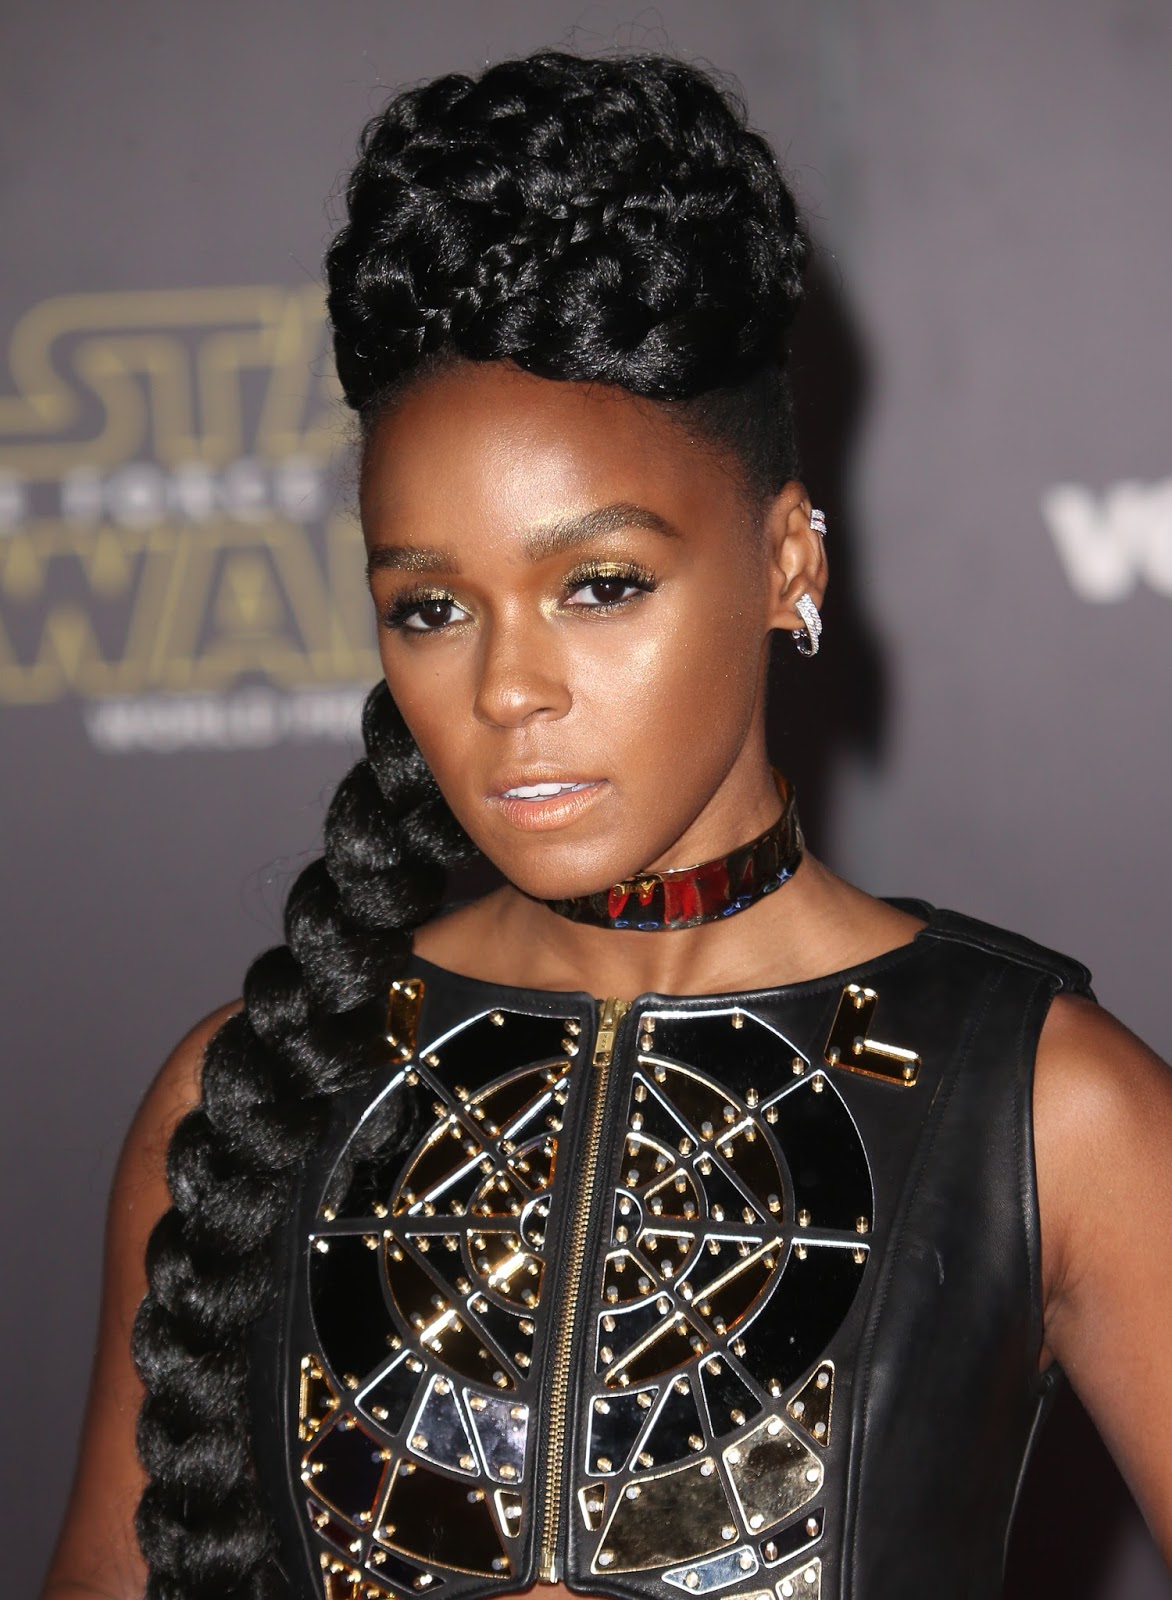 Actress, Singer, @ Janelle Monae - Star Wars: The Force Awakens Premiere in Hollywood ...